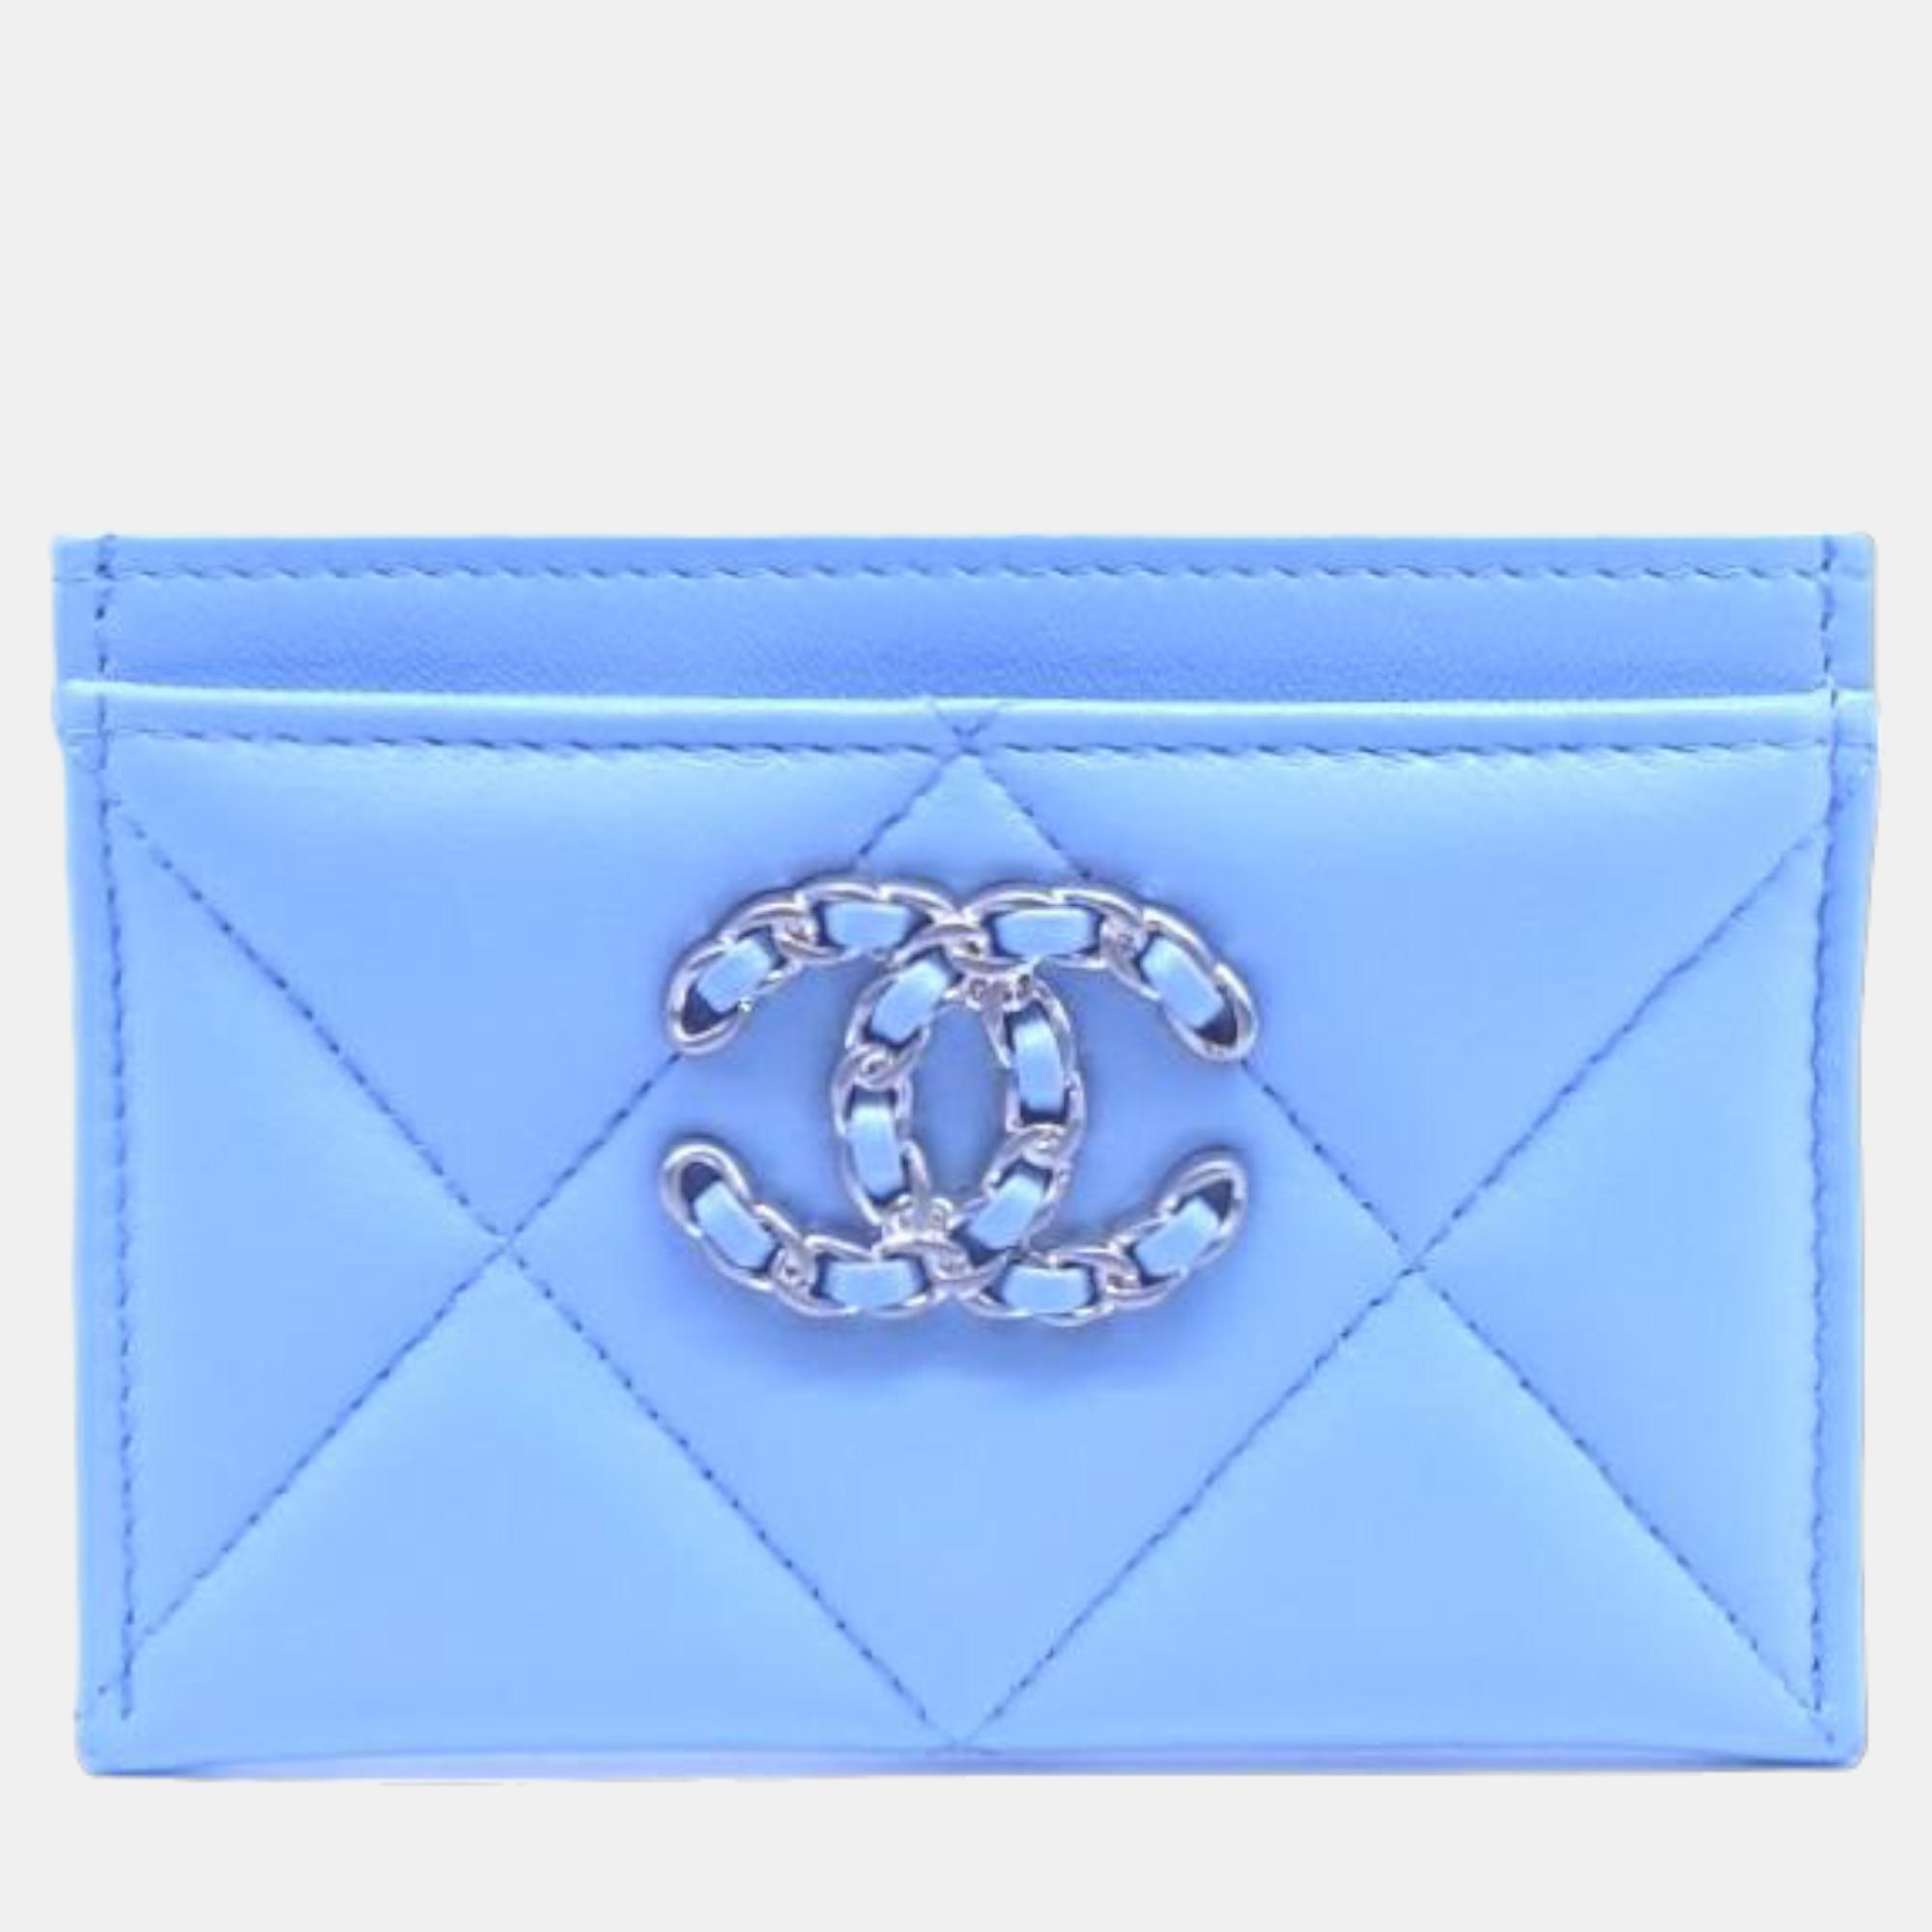 Chanel blue leather 19 card wallet